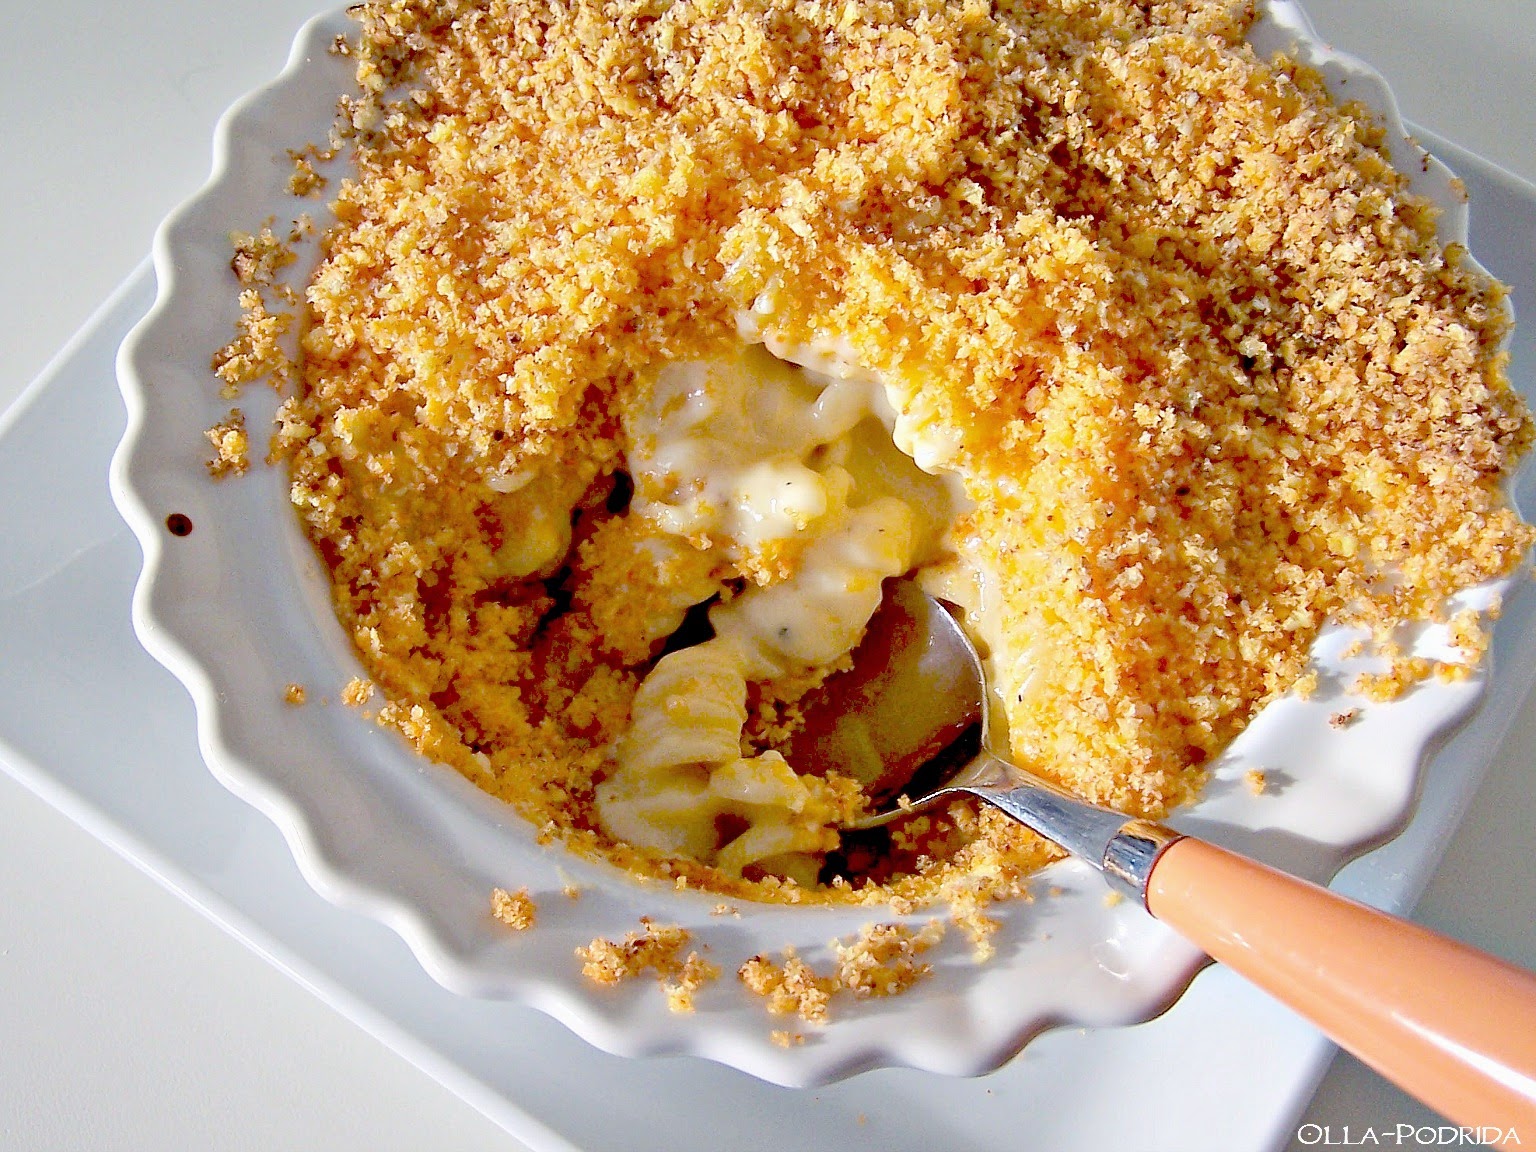 Cheetos-Crusted Mac And Cheese | Hot Cheetos Recipes For A Spiced Up Summer | Homemade Recipes